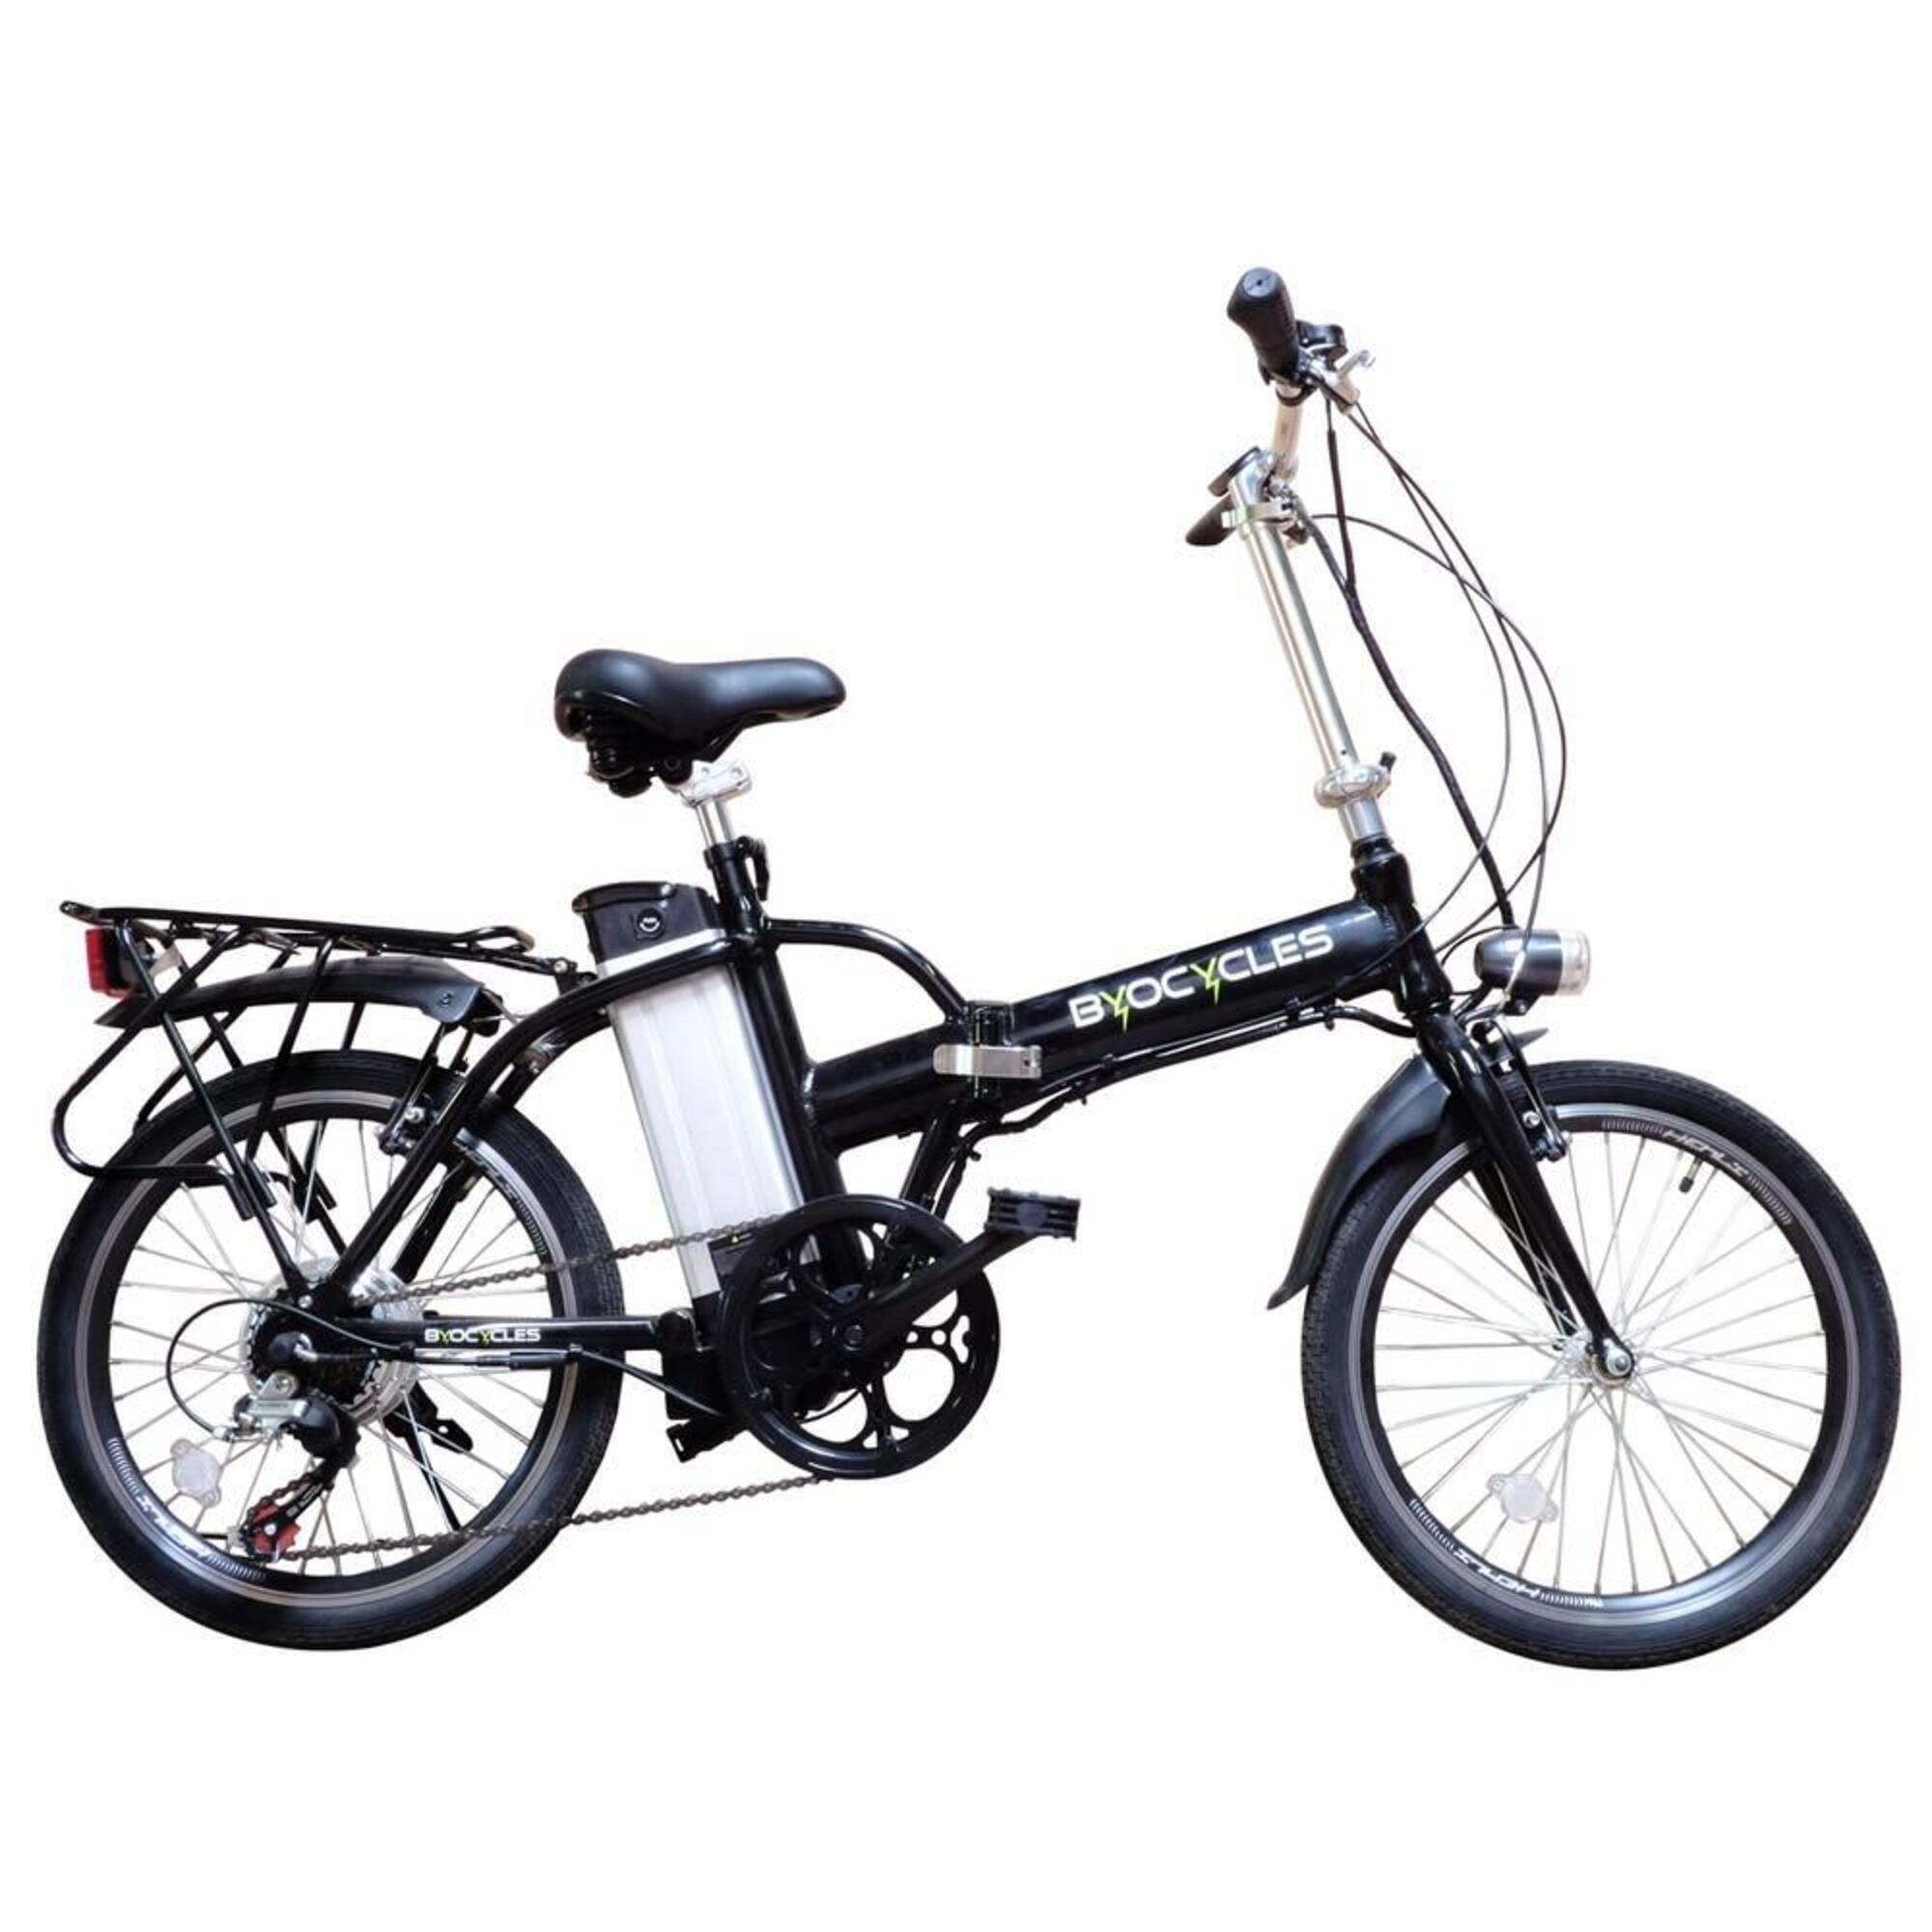 byocycle spare parts